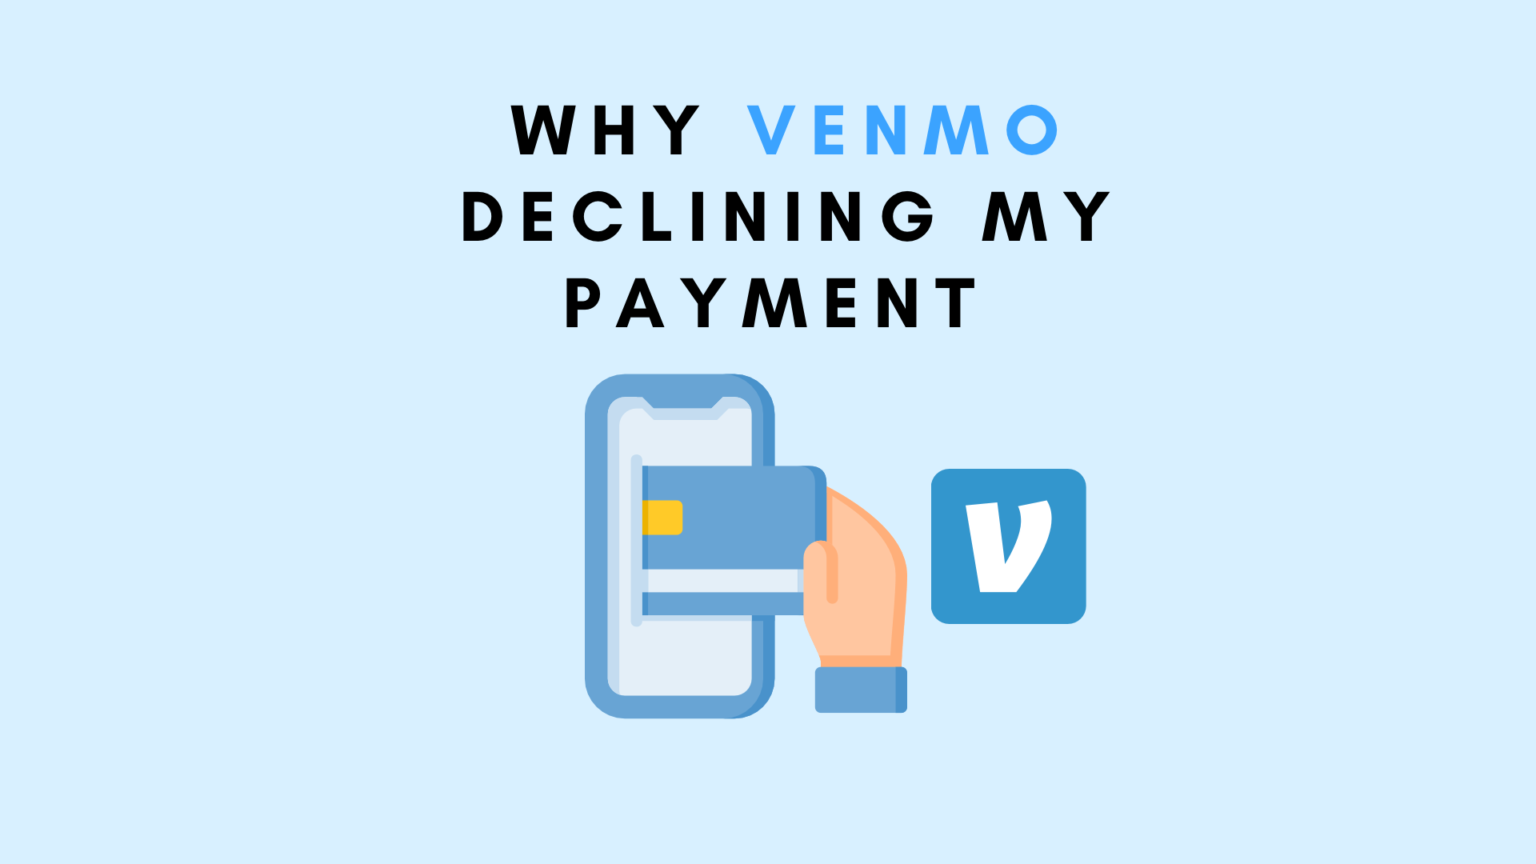 Demystifying Venmo Payment Declines Causes and Solutions